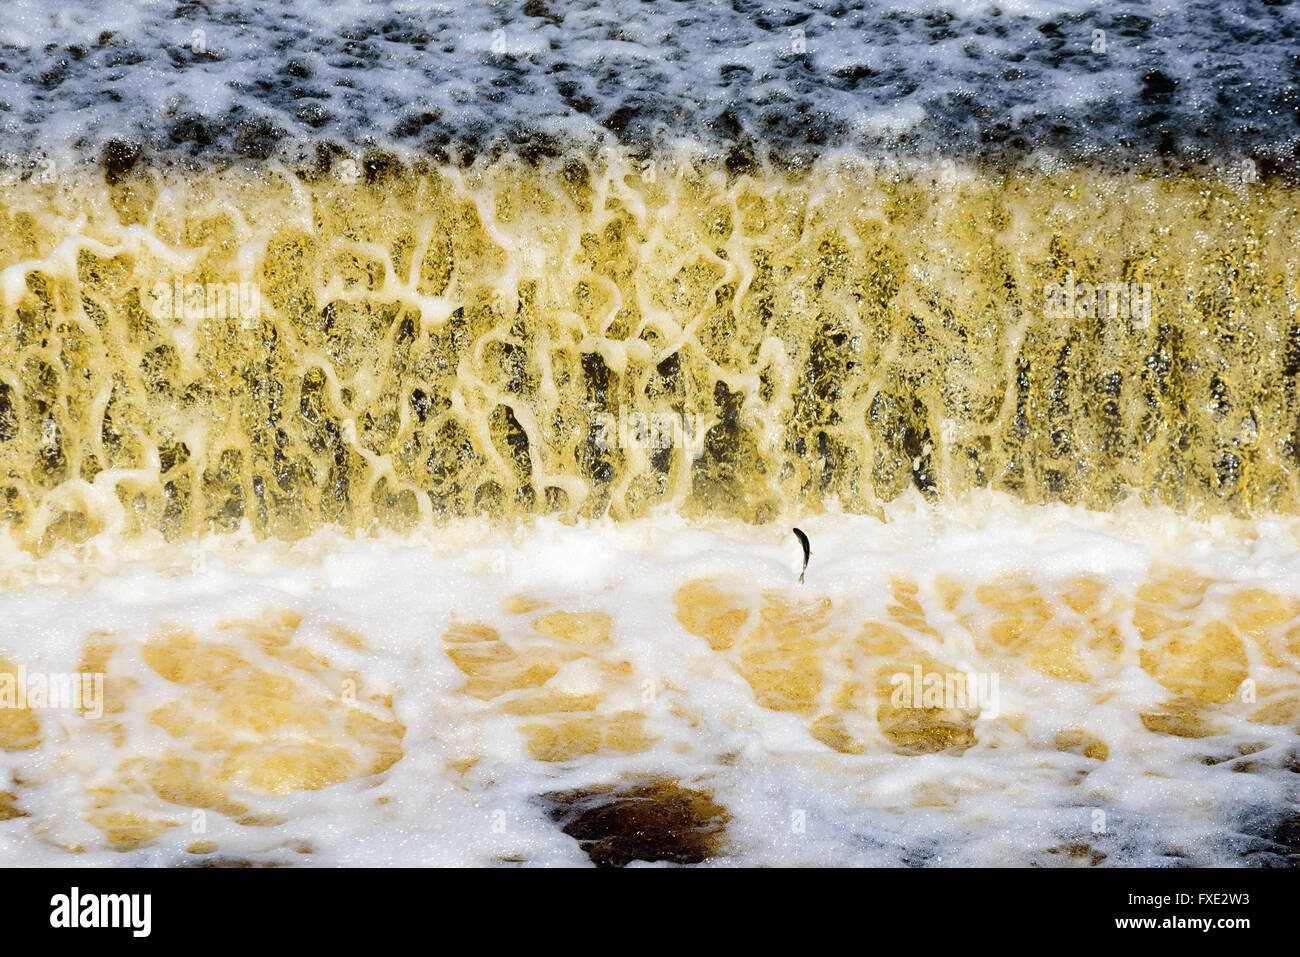 Small fish jumping at a manmade waterfall downstream from a water reservoir in Lyckeby, Sweden. Stock Photo